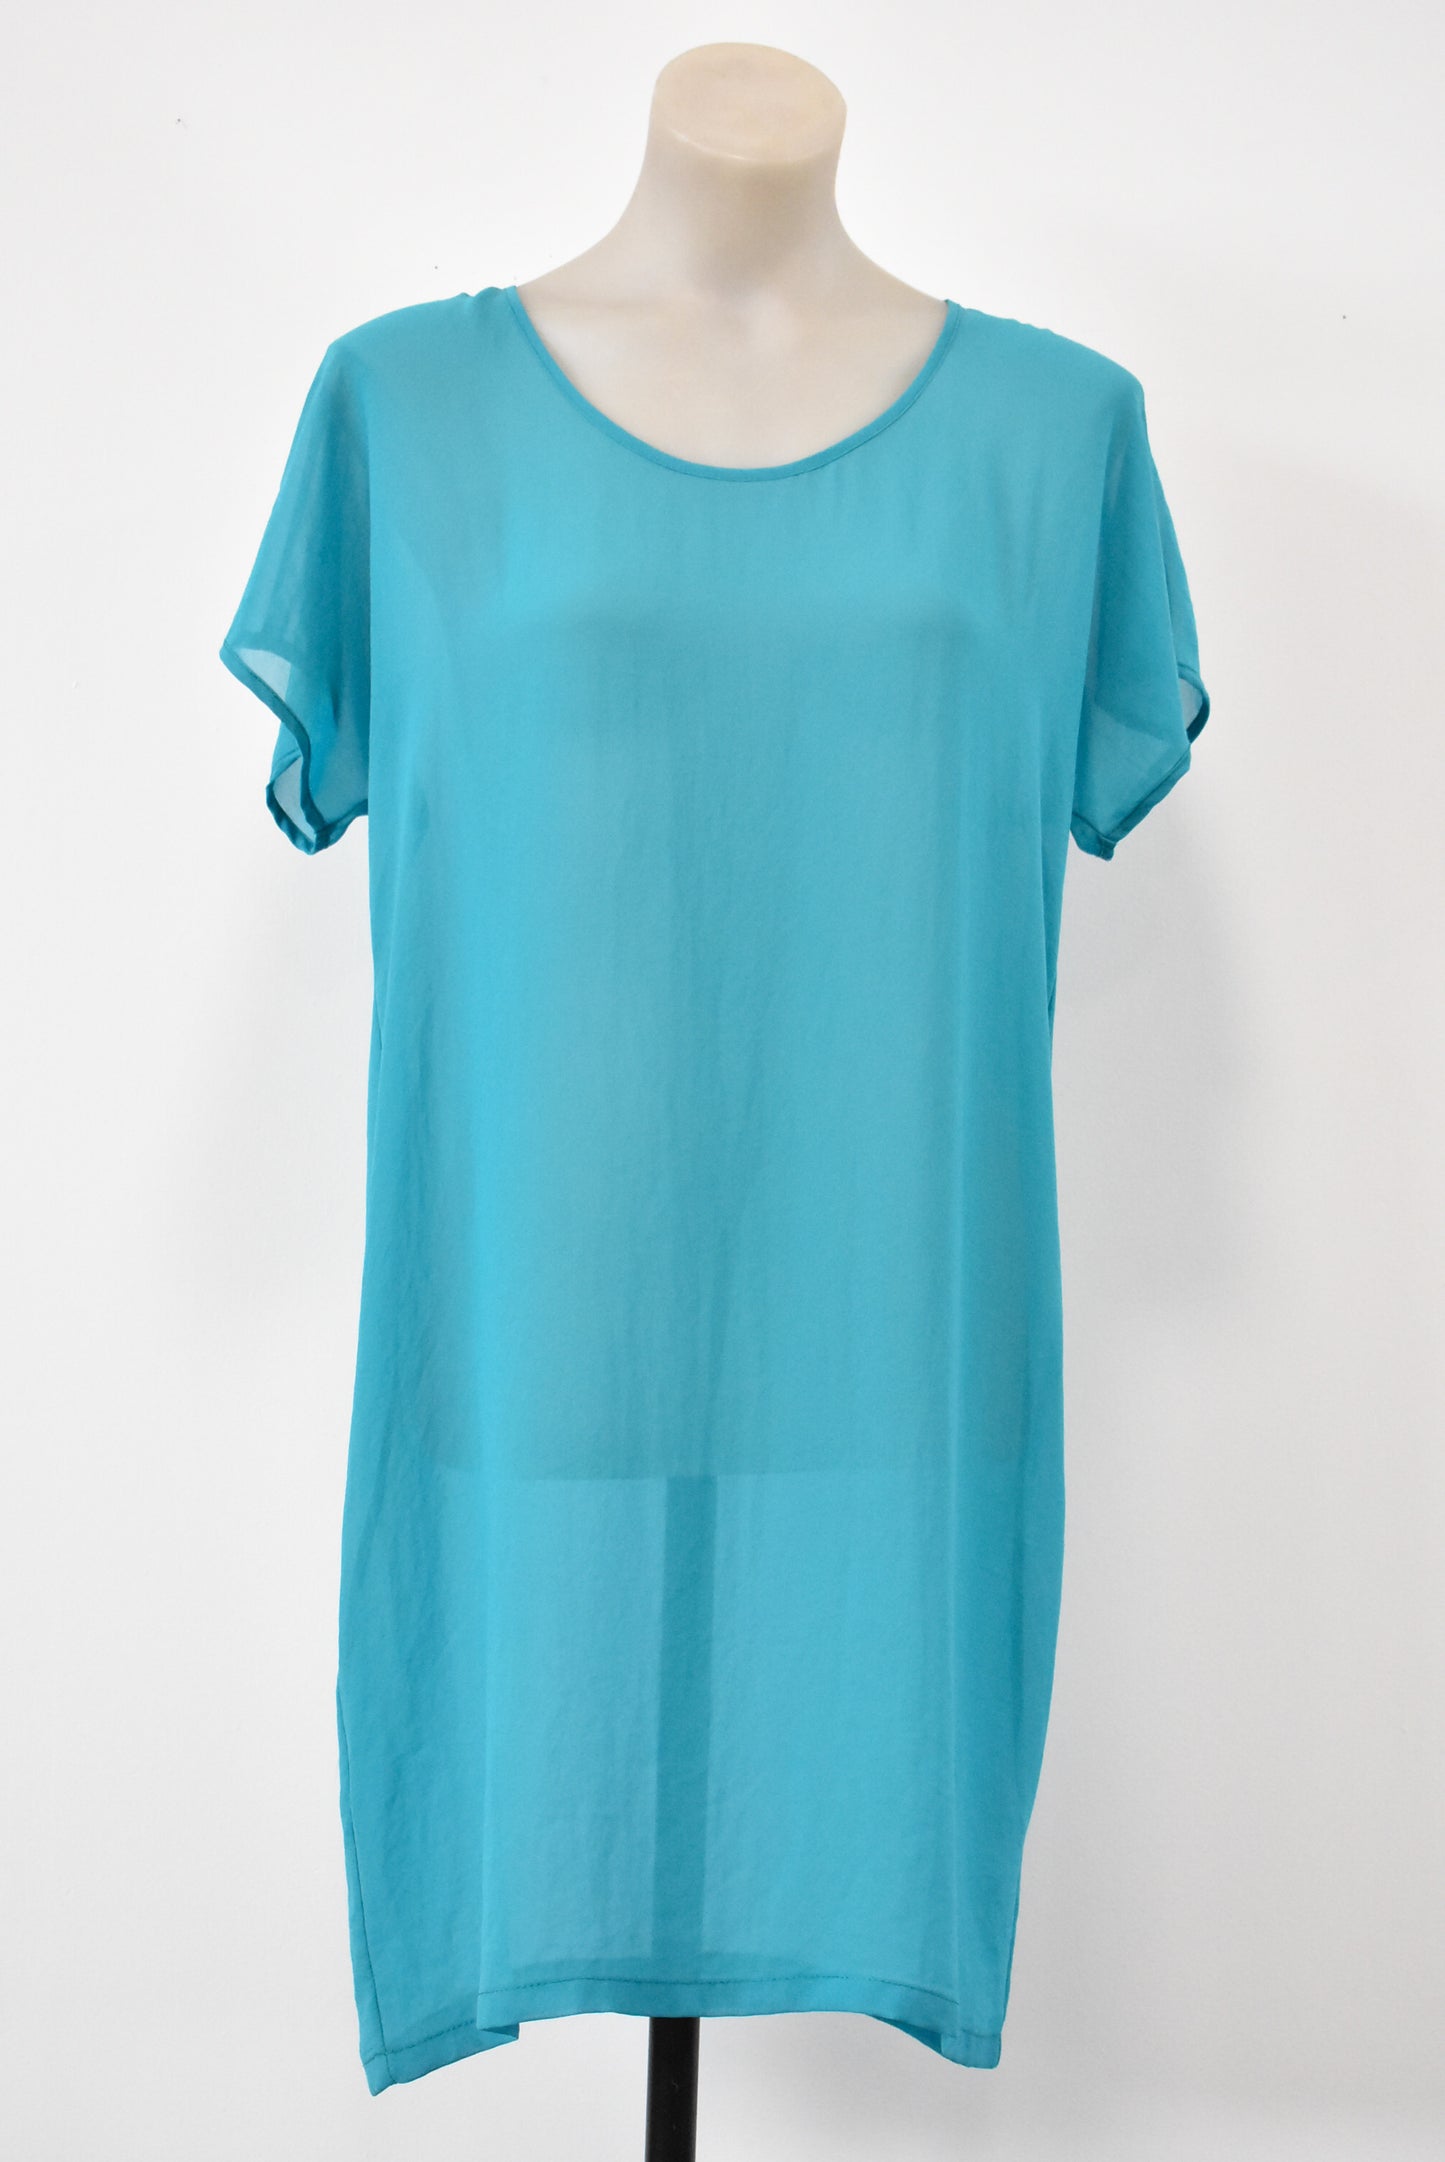 End of Story sheer top/tunic, 8